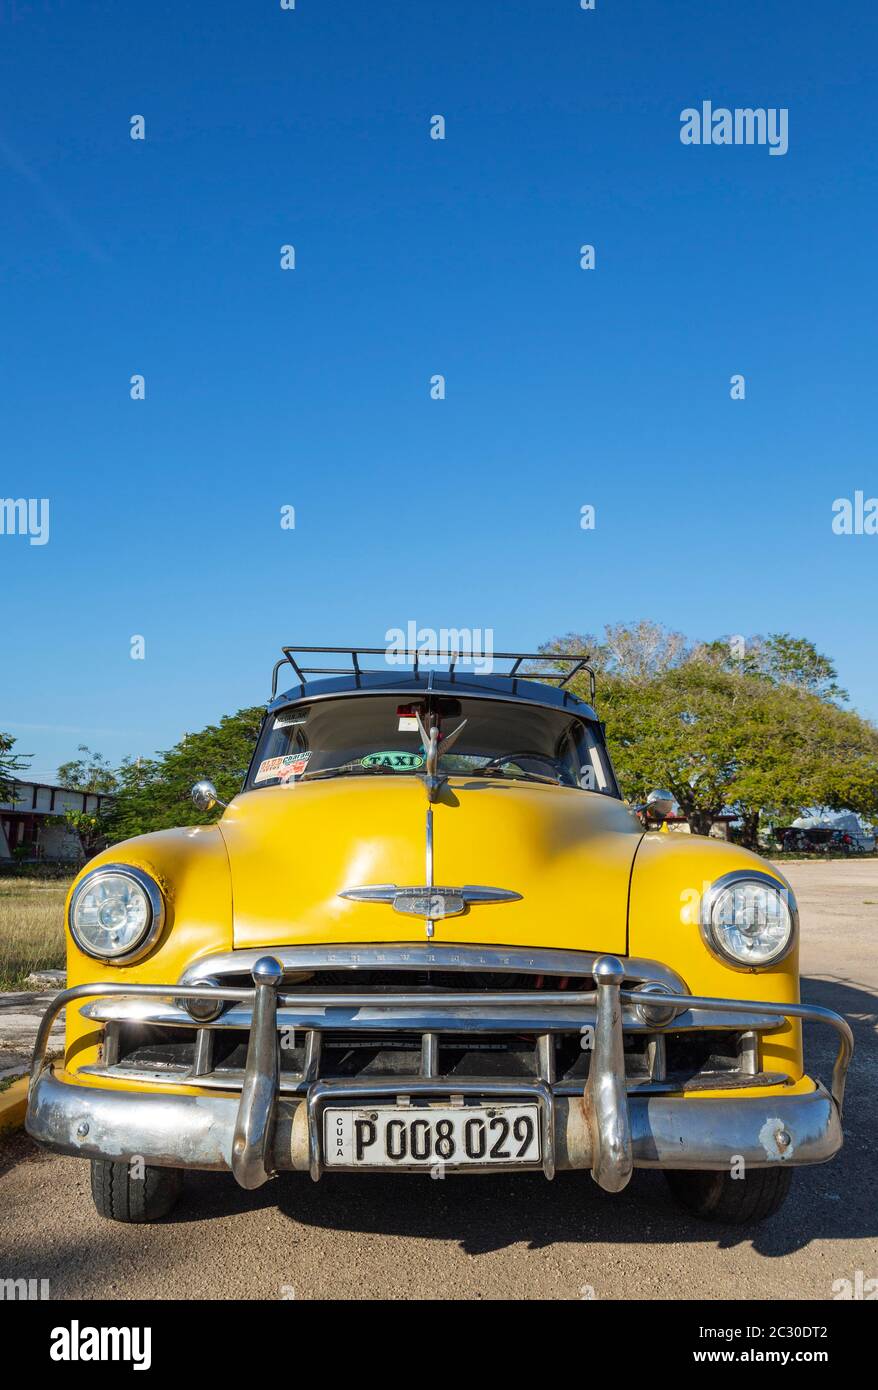 Chevrolet used as a taxi, classic car from the 1950s, Playa Giron, Cuba Stock Photo